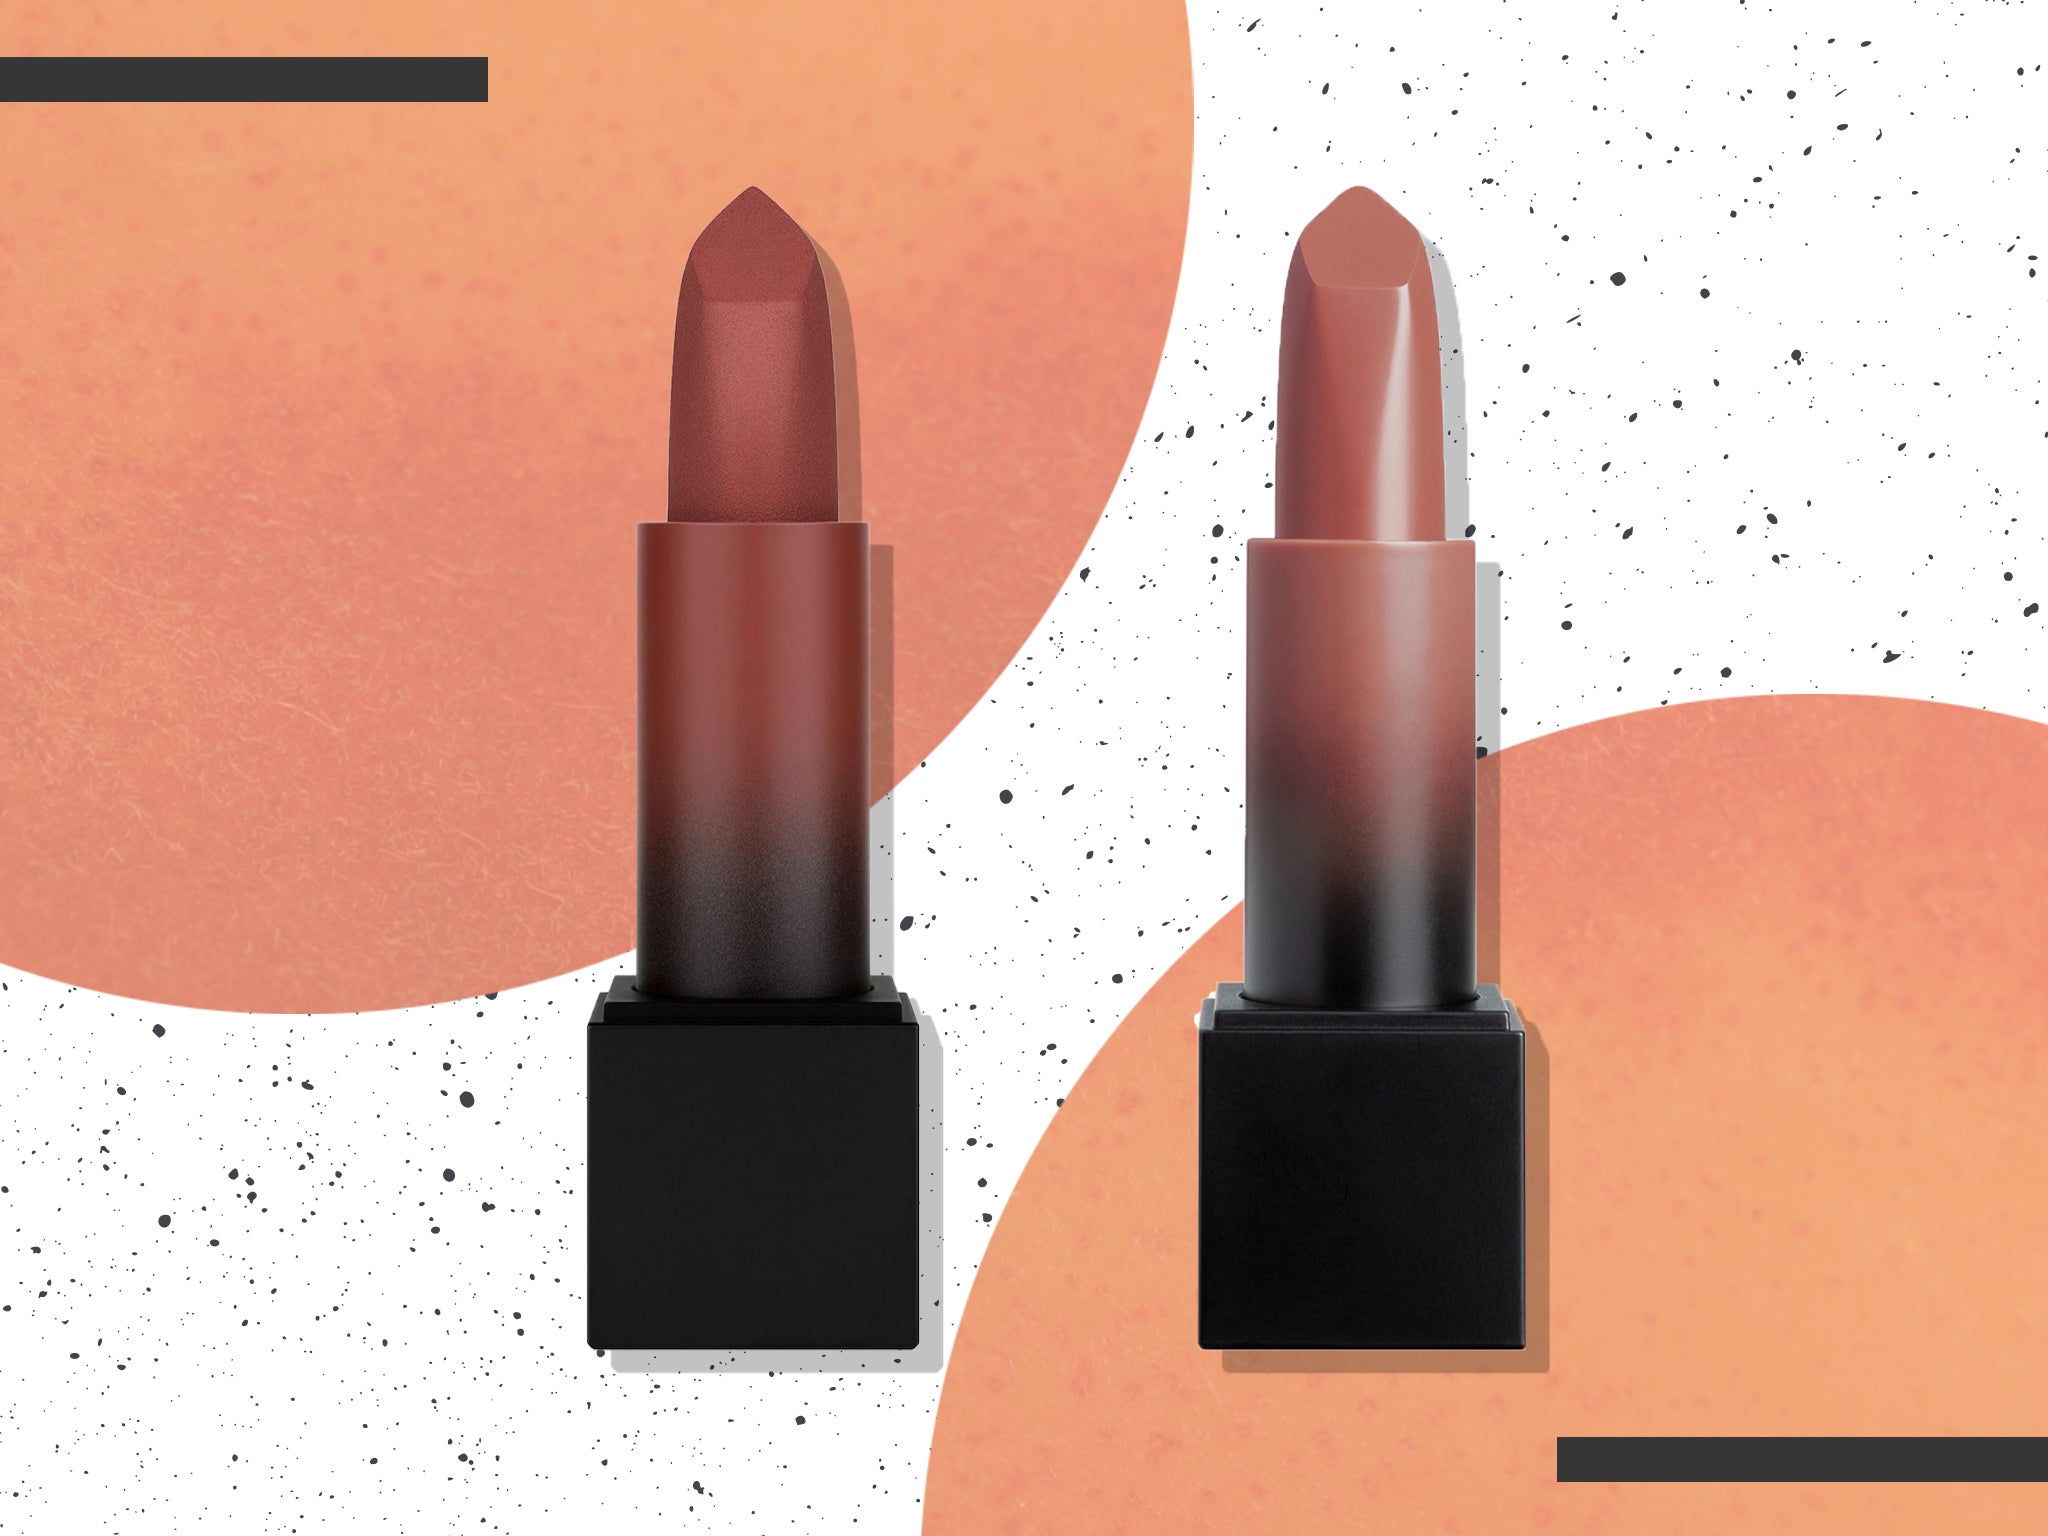 The matte lipstick is one of Huda Beauty’s bestselling products, but will it be outdone by the new, creamier formula?